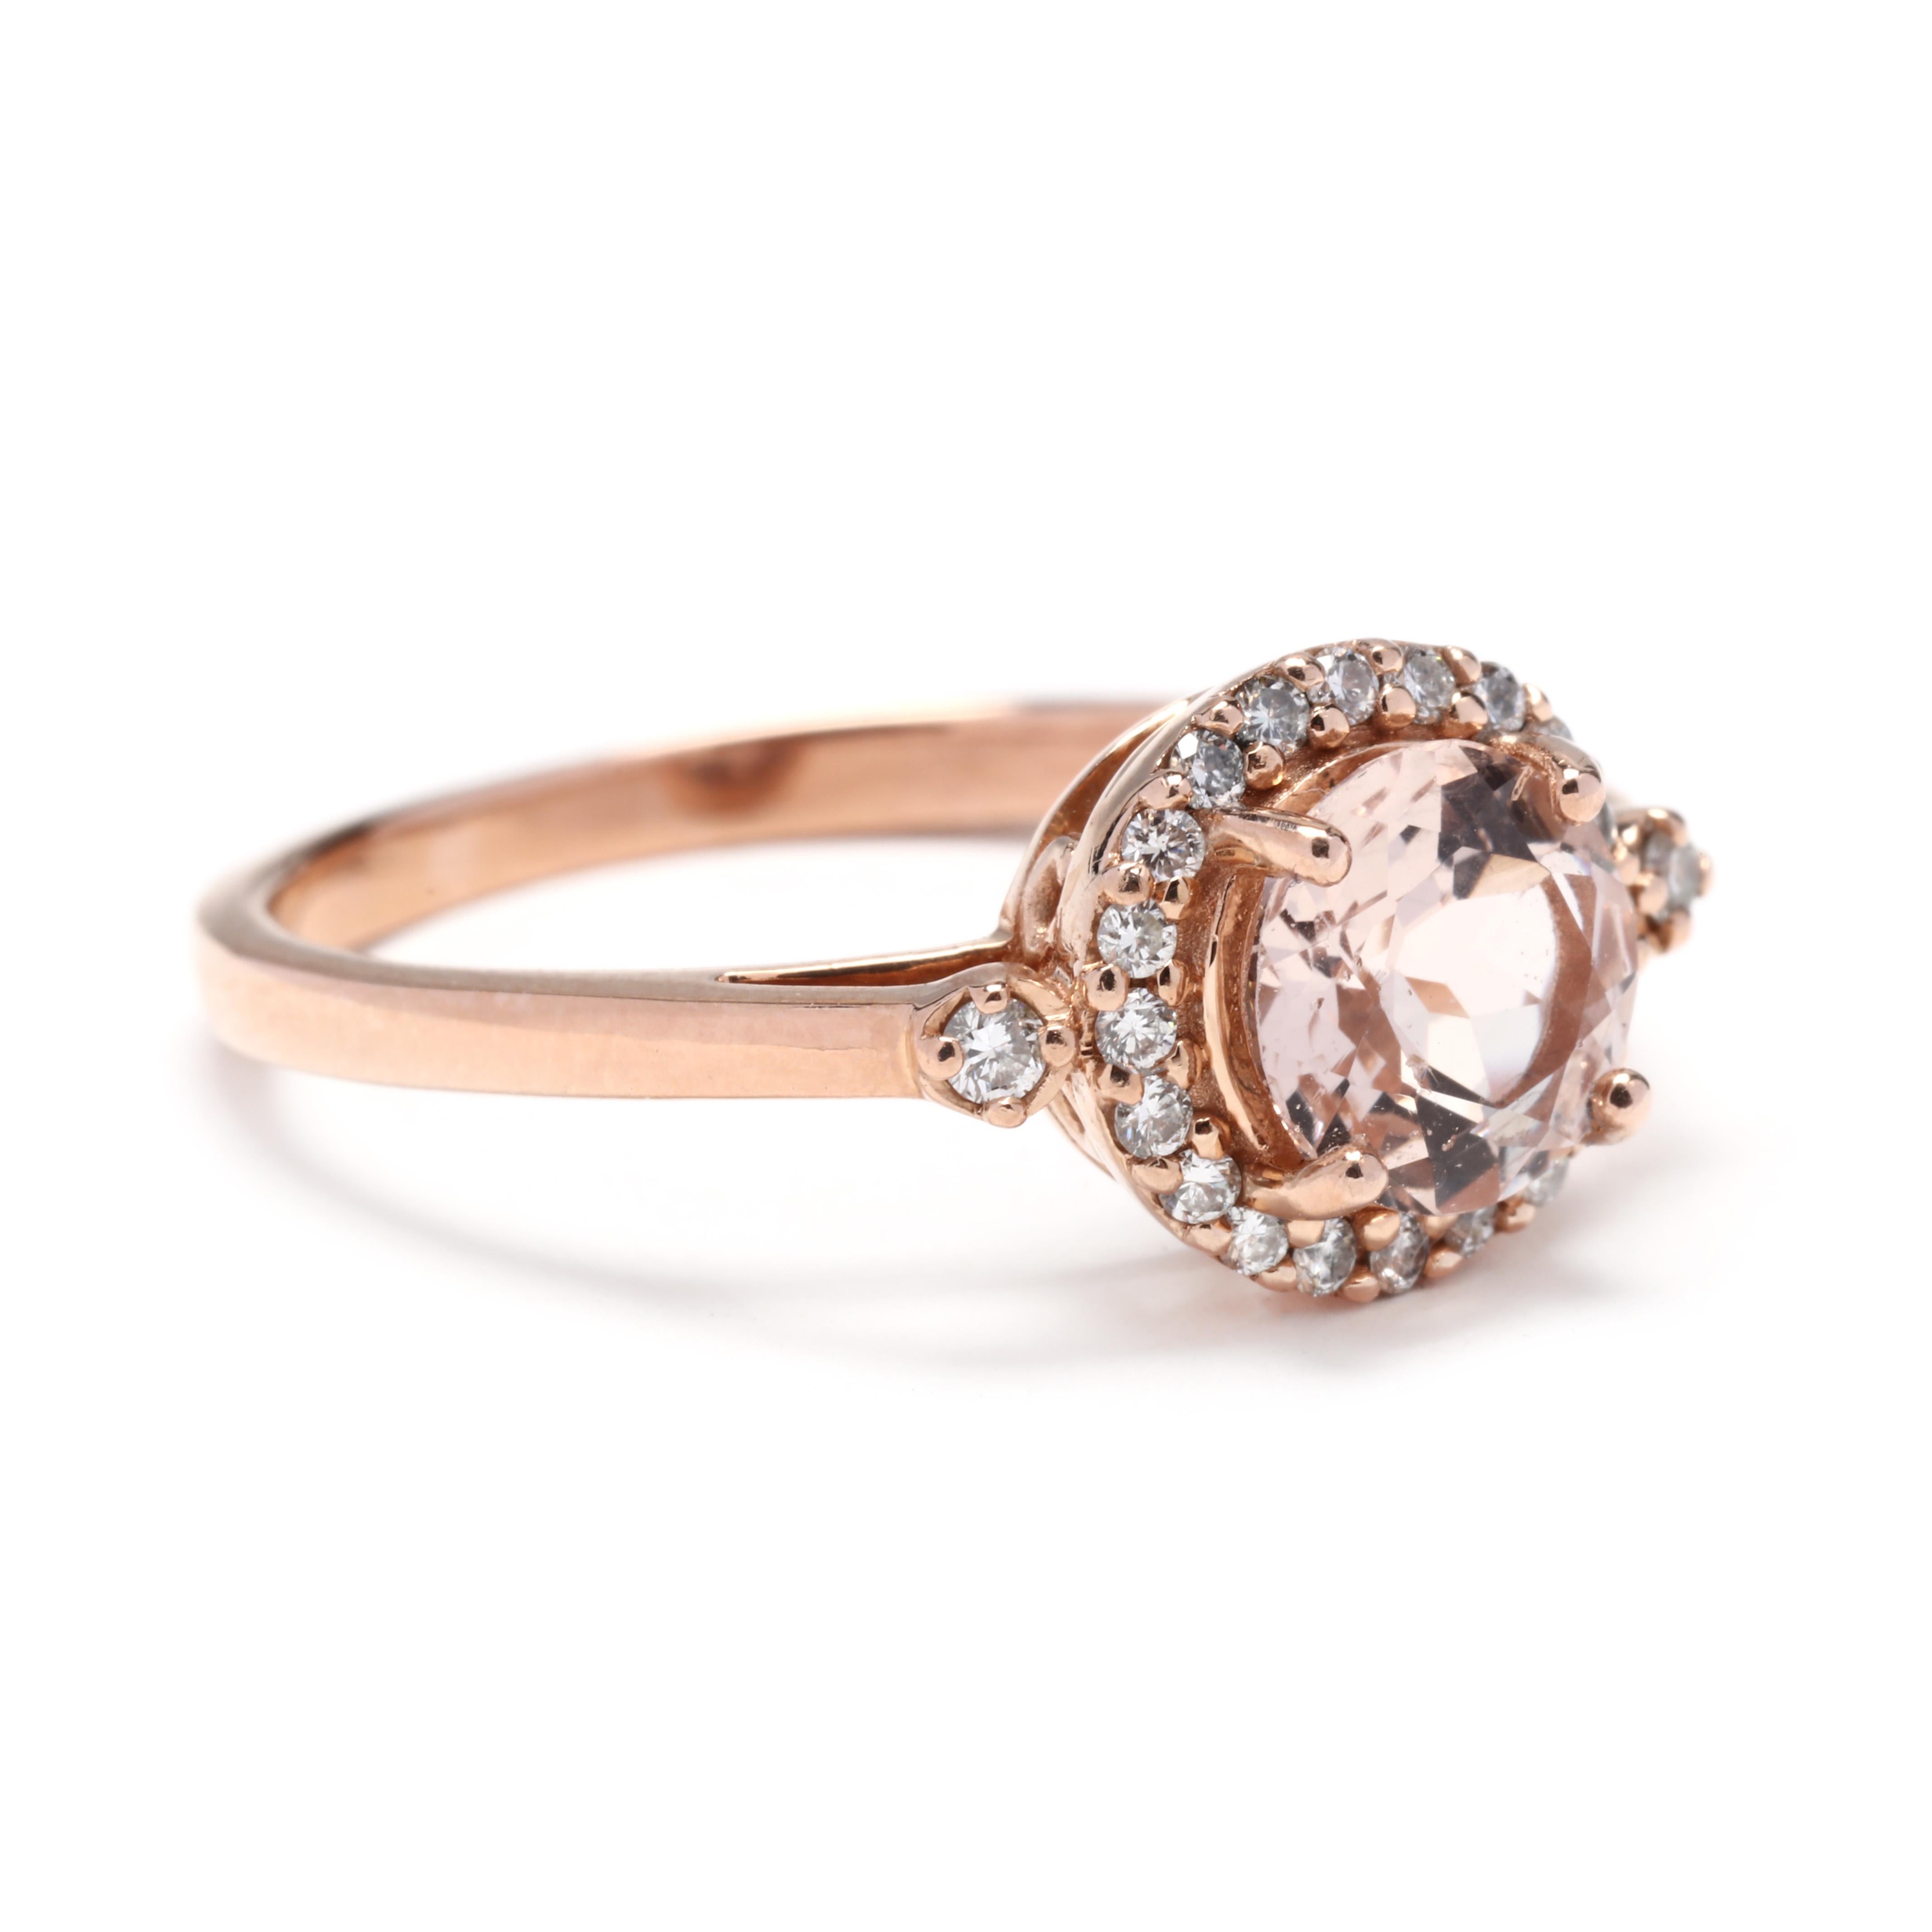 A 14 karat rose gold morganite and diamond ring. This ring features a round cut morganite weighing approximately 1.20 carats surrounded by full cut round diamonds and a diamond on either side weighing approximately .23 total carats and a thin